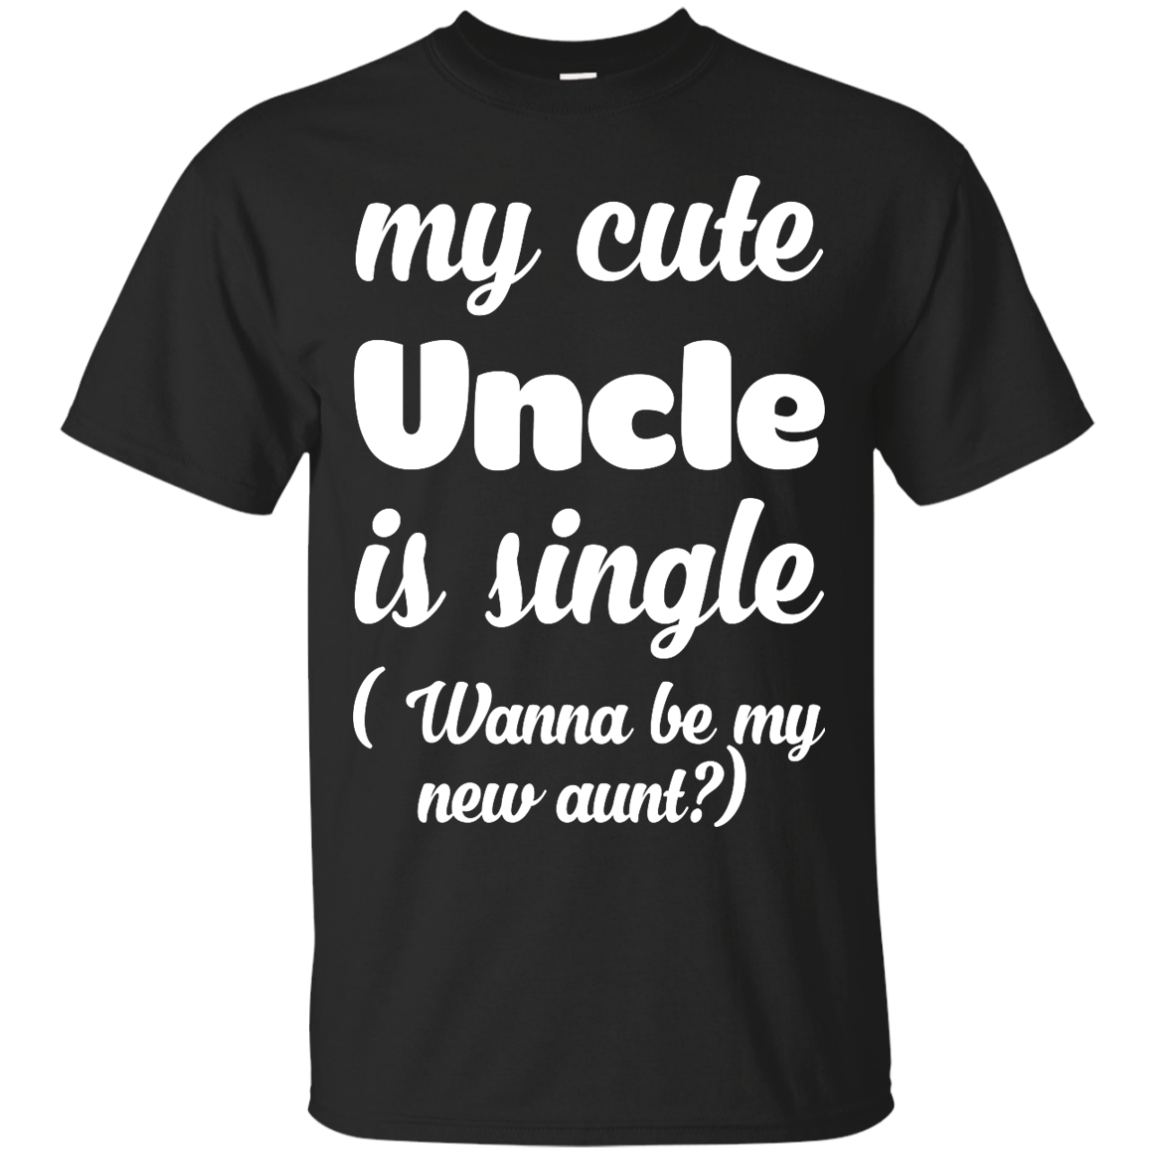 My cute Uncle is single wanna be my new aunt shirt, Youth shirt